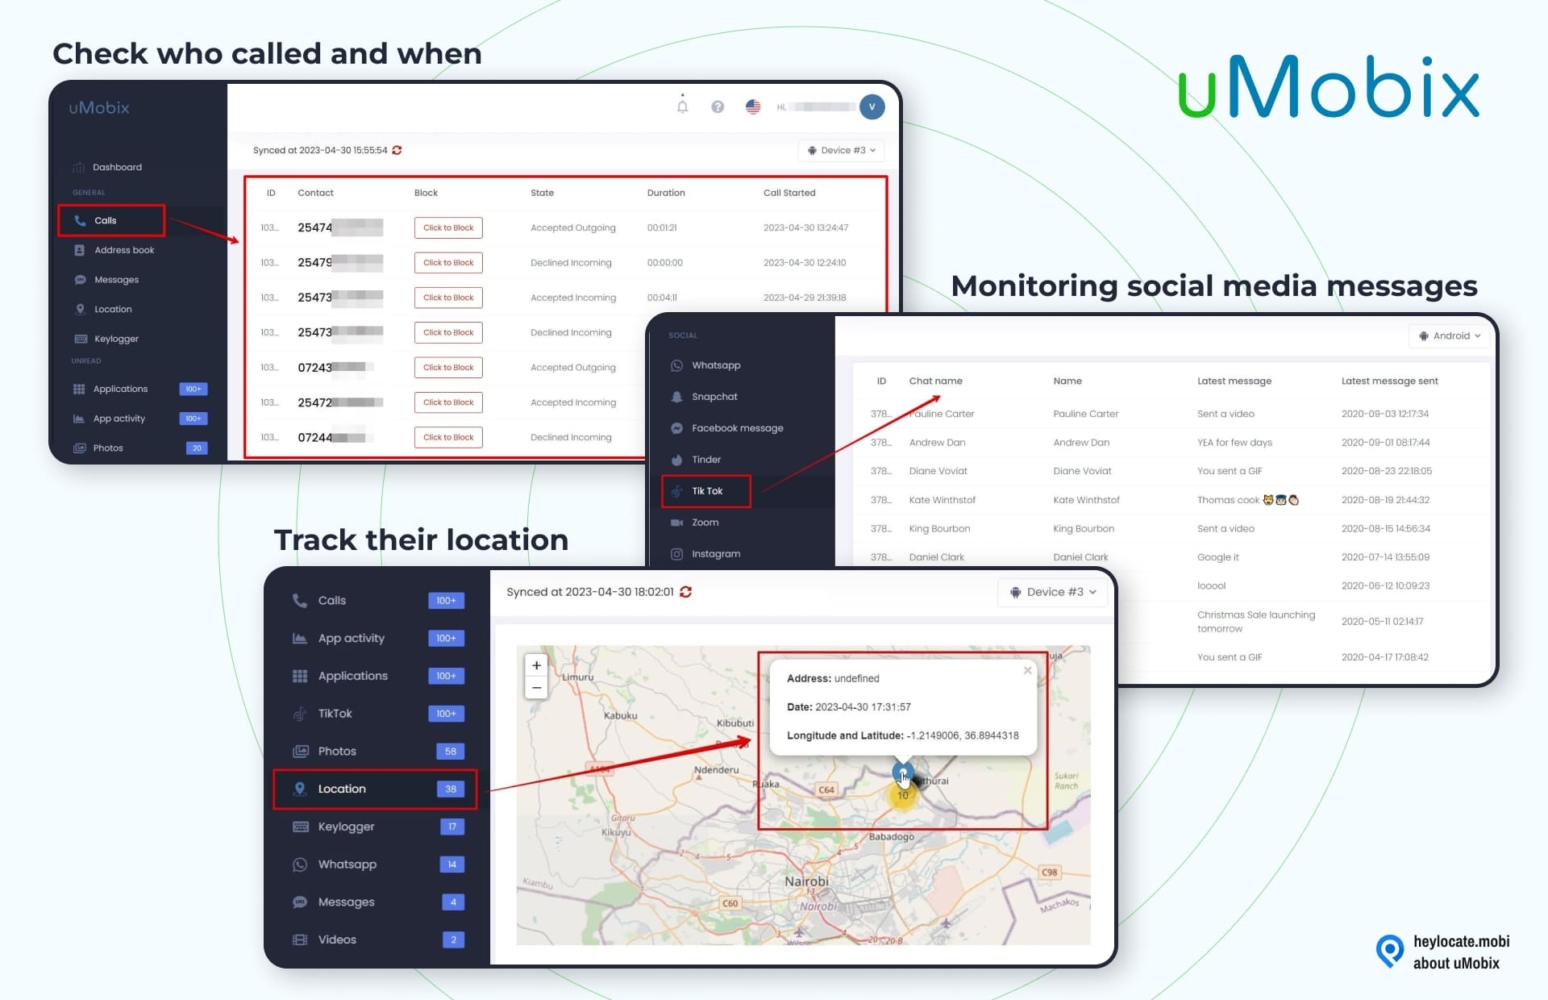 A screenshot of uMobix's mobile monitoring interface showing features for checking call history, monitoring social media messages, and tracking location on a map. The call history section lists calls with details such as contact, state, duration, and start time. The social media monitoring section displays various platforms like WhatsApp, Snapchat, and Tinder, with columns for name, latest message, and time. The location tracker shows a map pinpointing a location with coordinates and a timestamp. The design indicates functionality for real-time surveillance of mobile device activities.